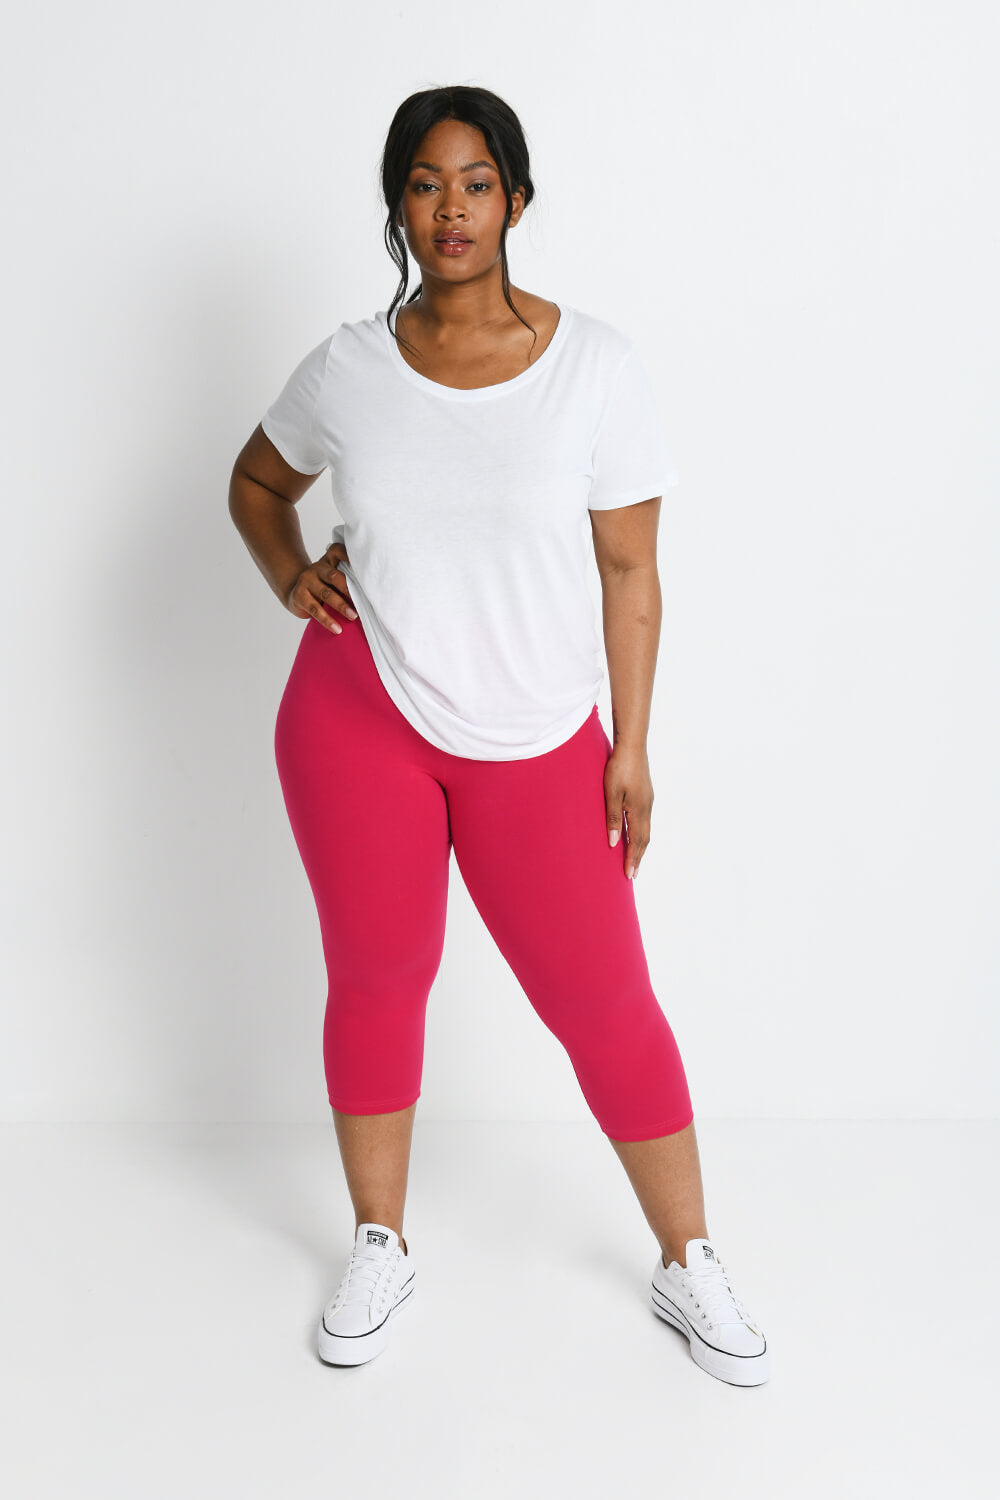 https://cdn.shopify.com/s/files/1/0014/0306/0312/products/C_Intense_Pink_Plus_Size_Cropped_Leggings_1.jpg?v=1658500654